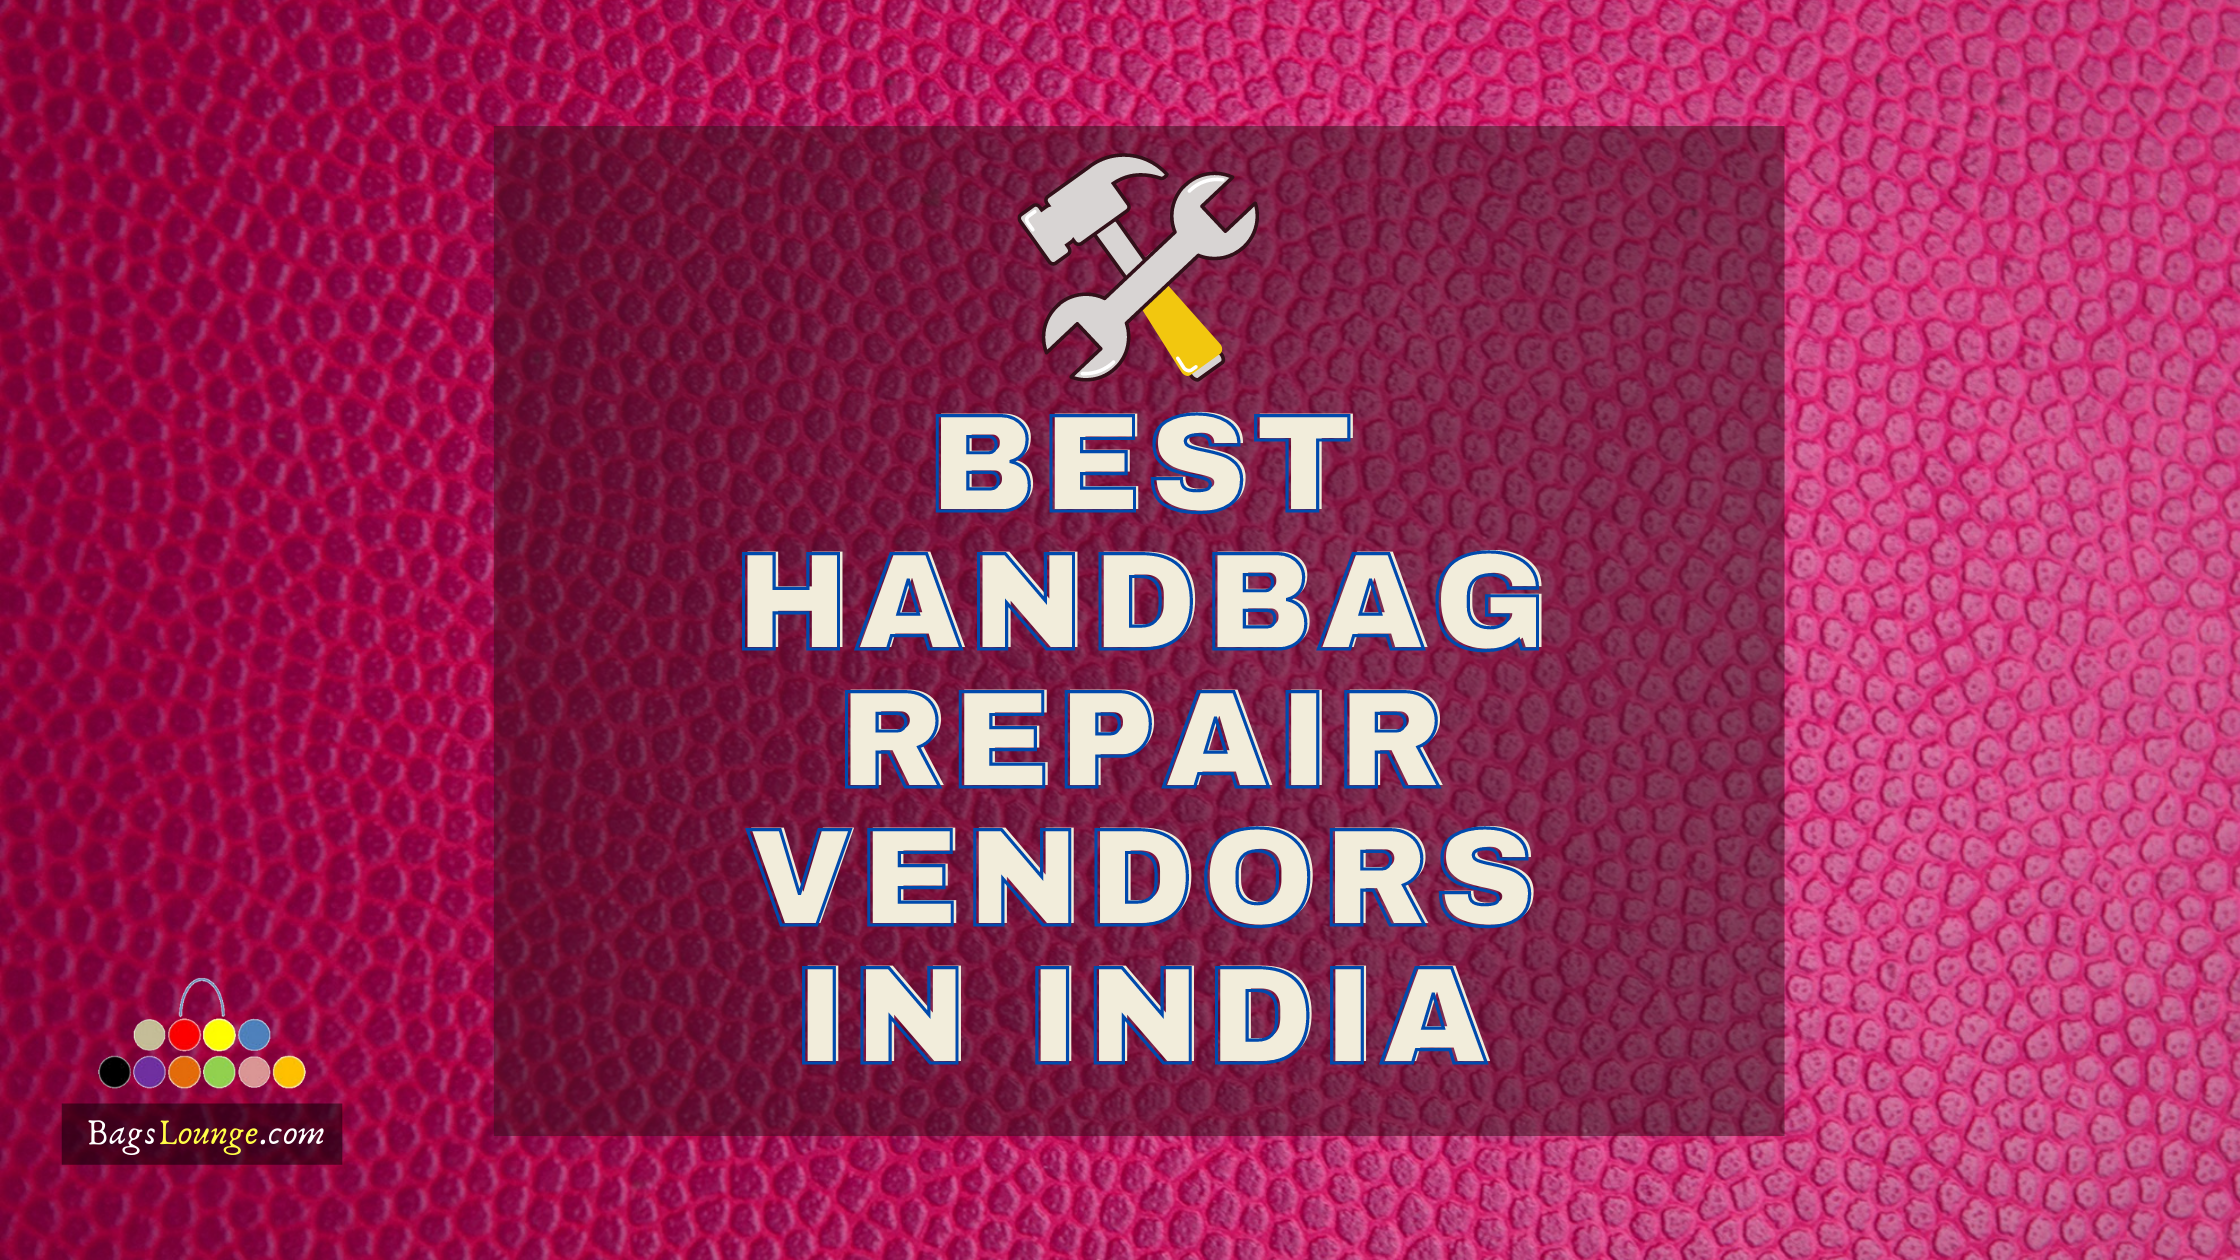 Bag Repair, Bag Stitching and Patching in India